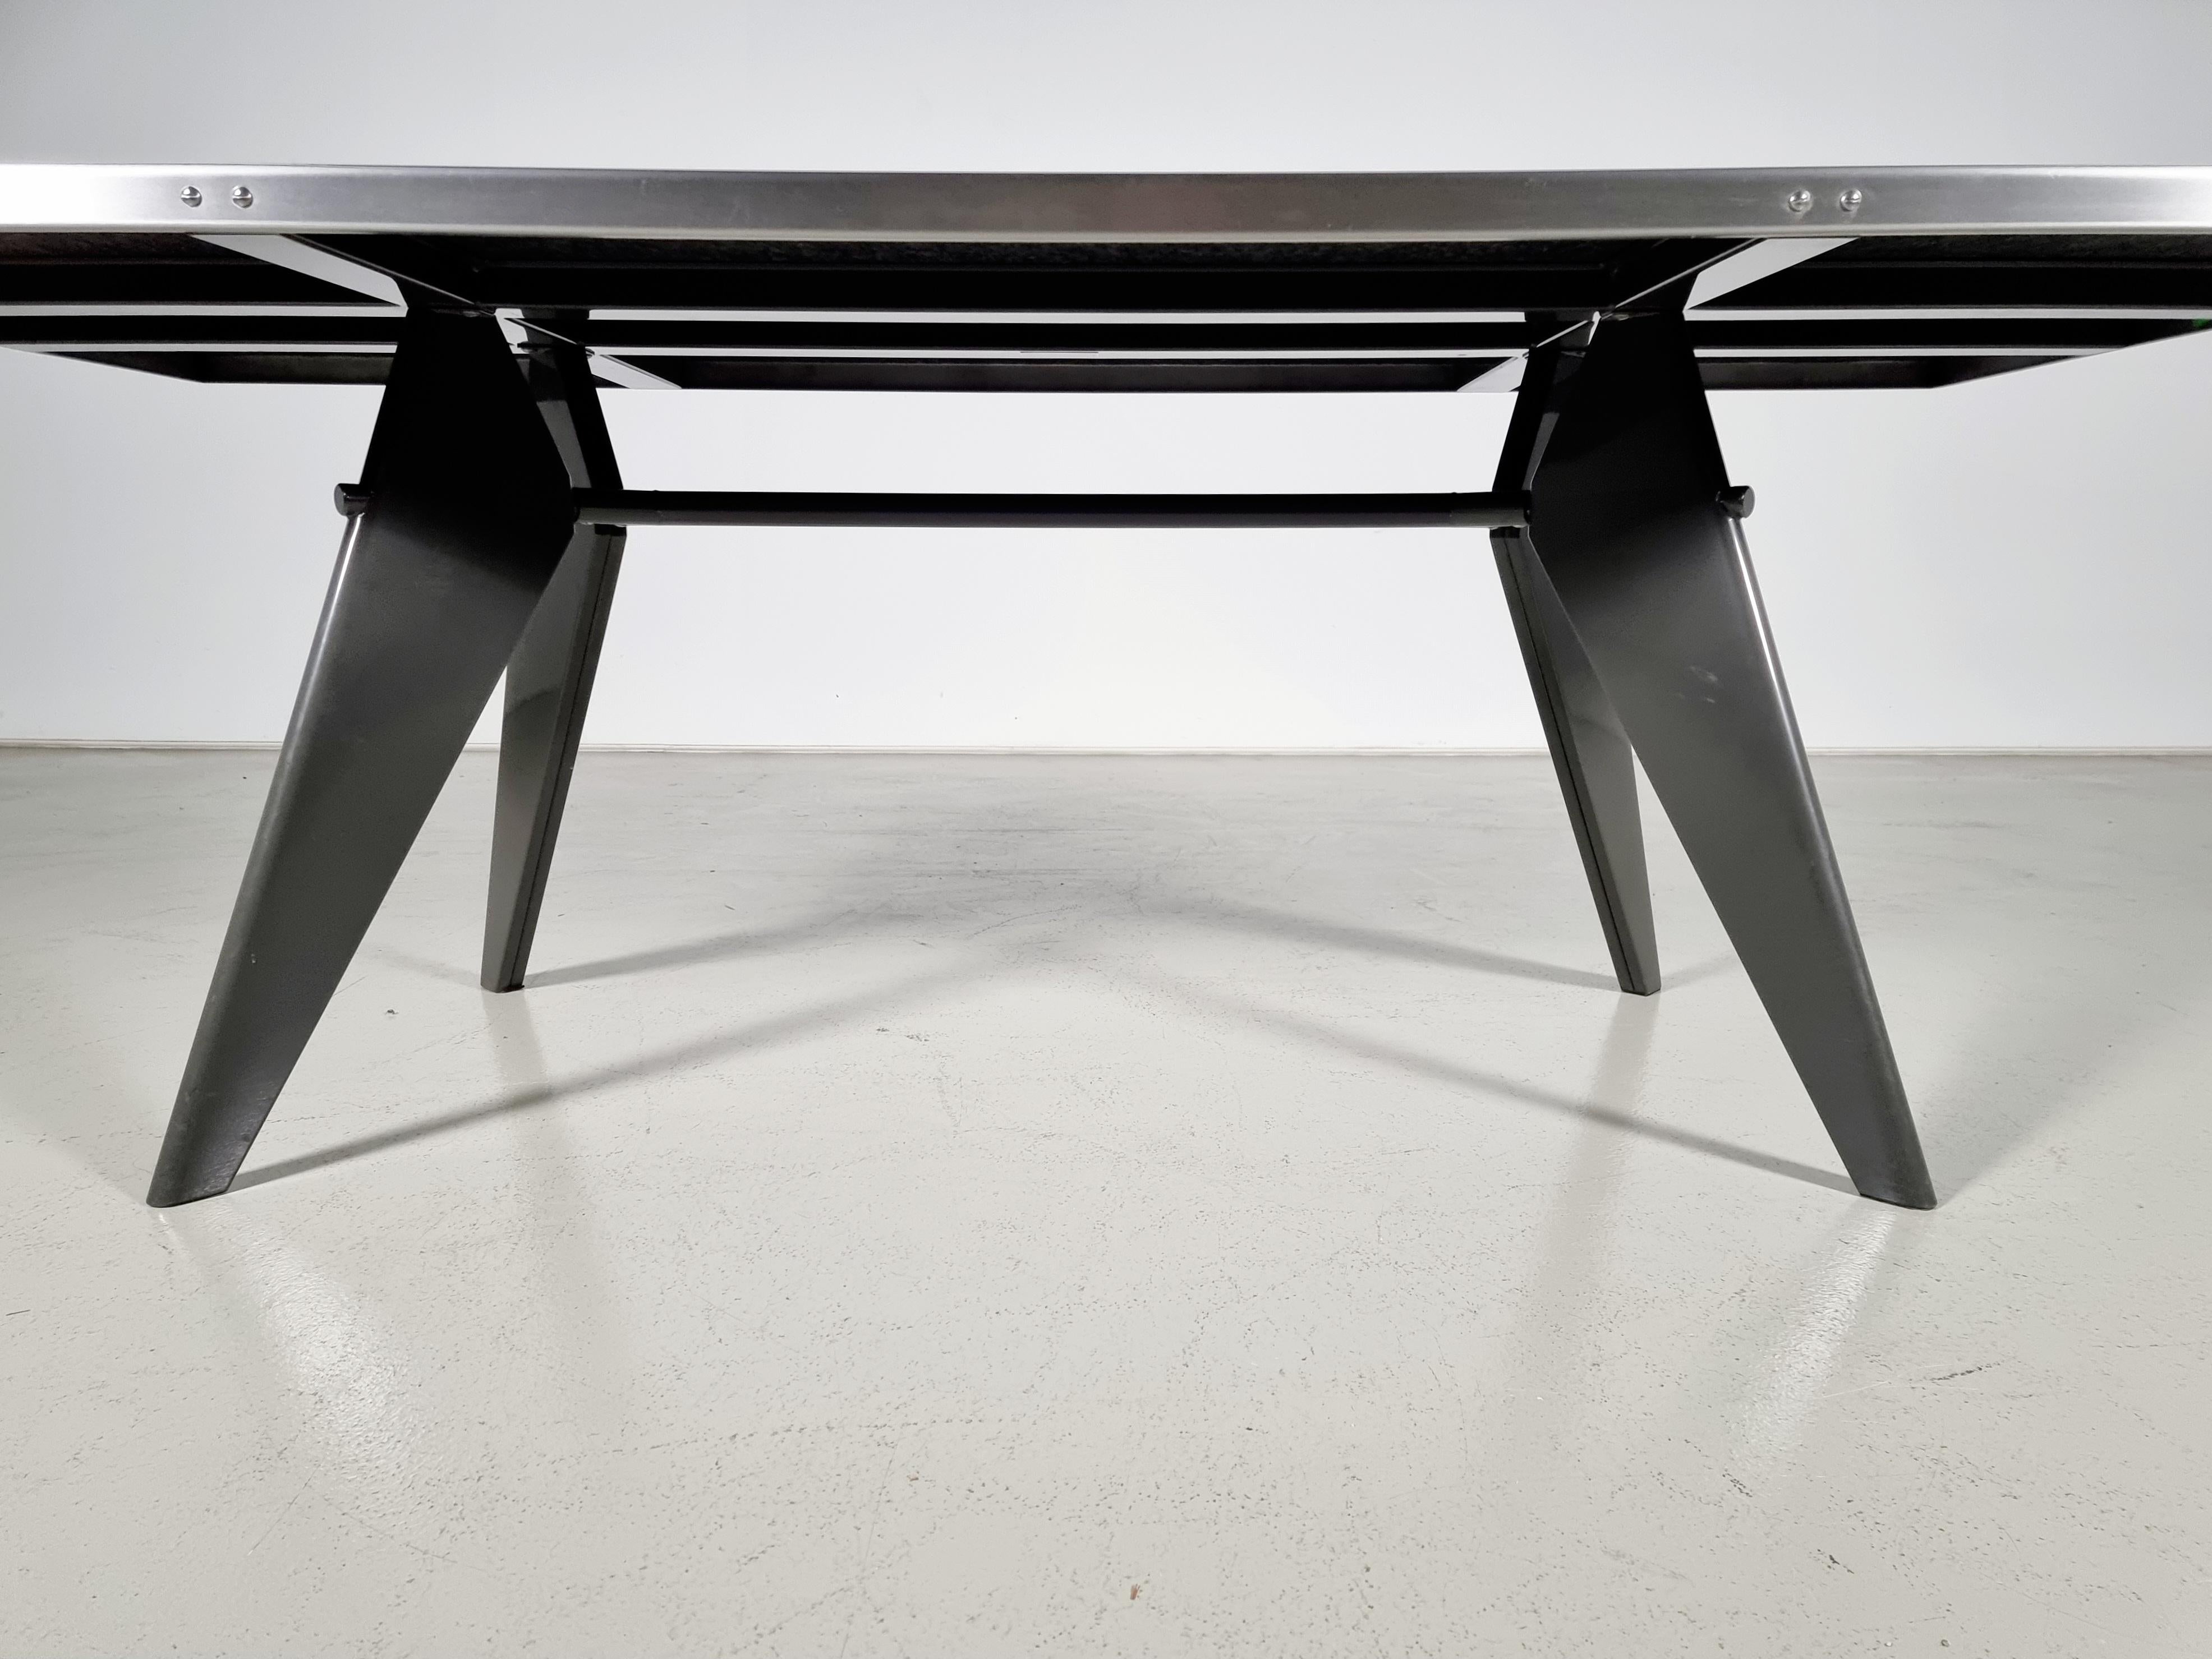 Jean Prouve by G-Star Raw for Vitra S.A.M. Tropique Table with matching chairs For Sale 4